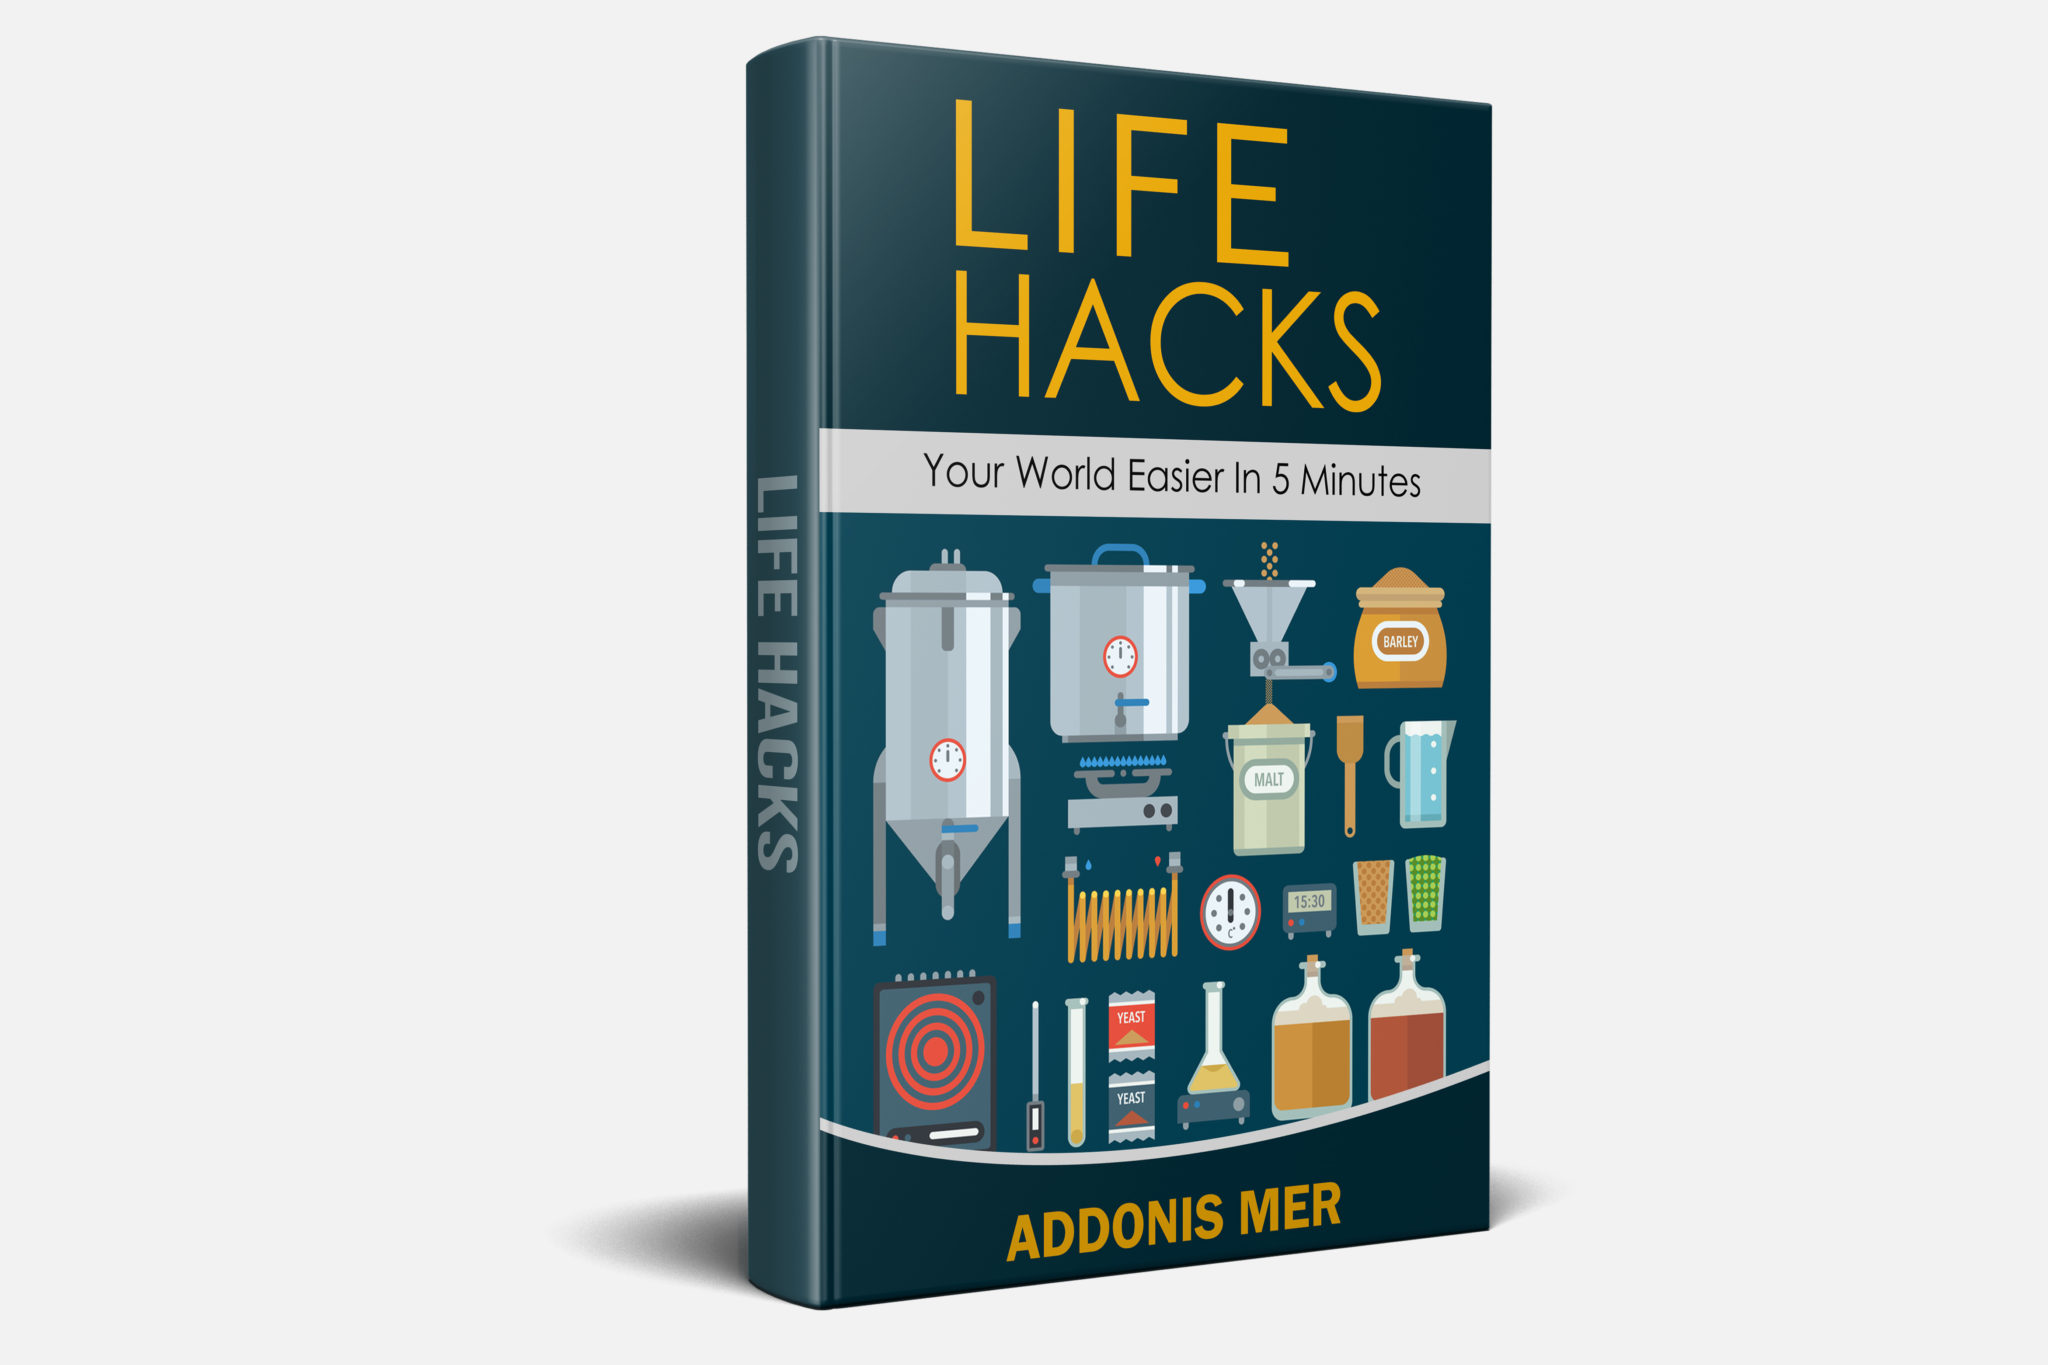 FREE: Life Hacks – Your World Easier in 5 Minutes: Amazing Guide to Home Tips and Crafts by Addonis Mer